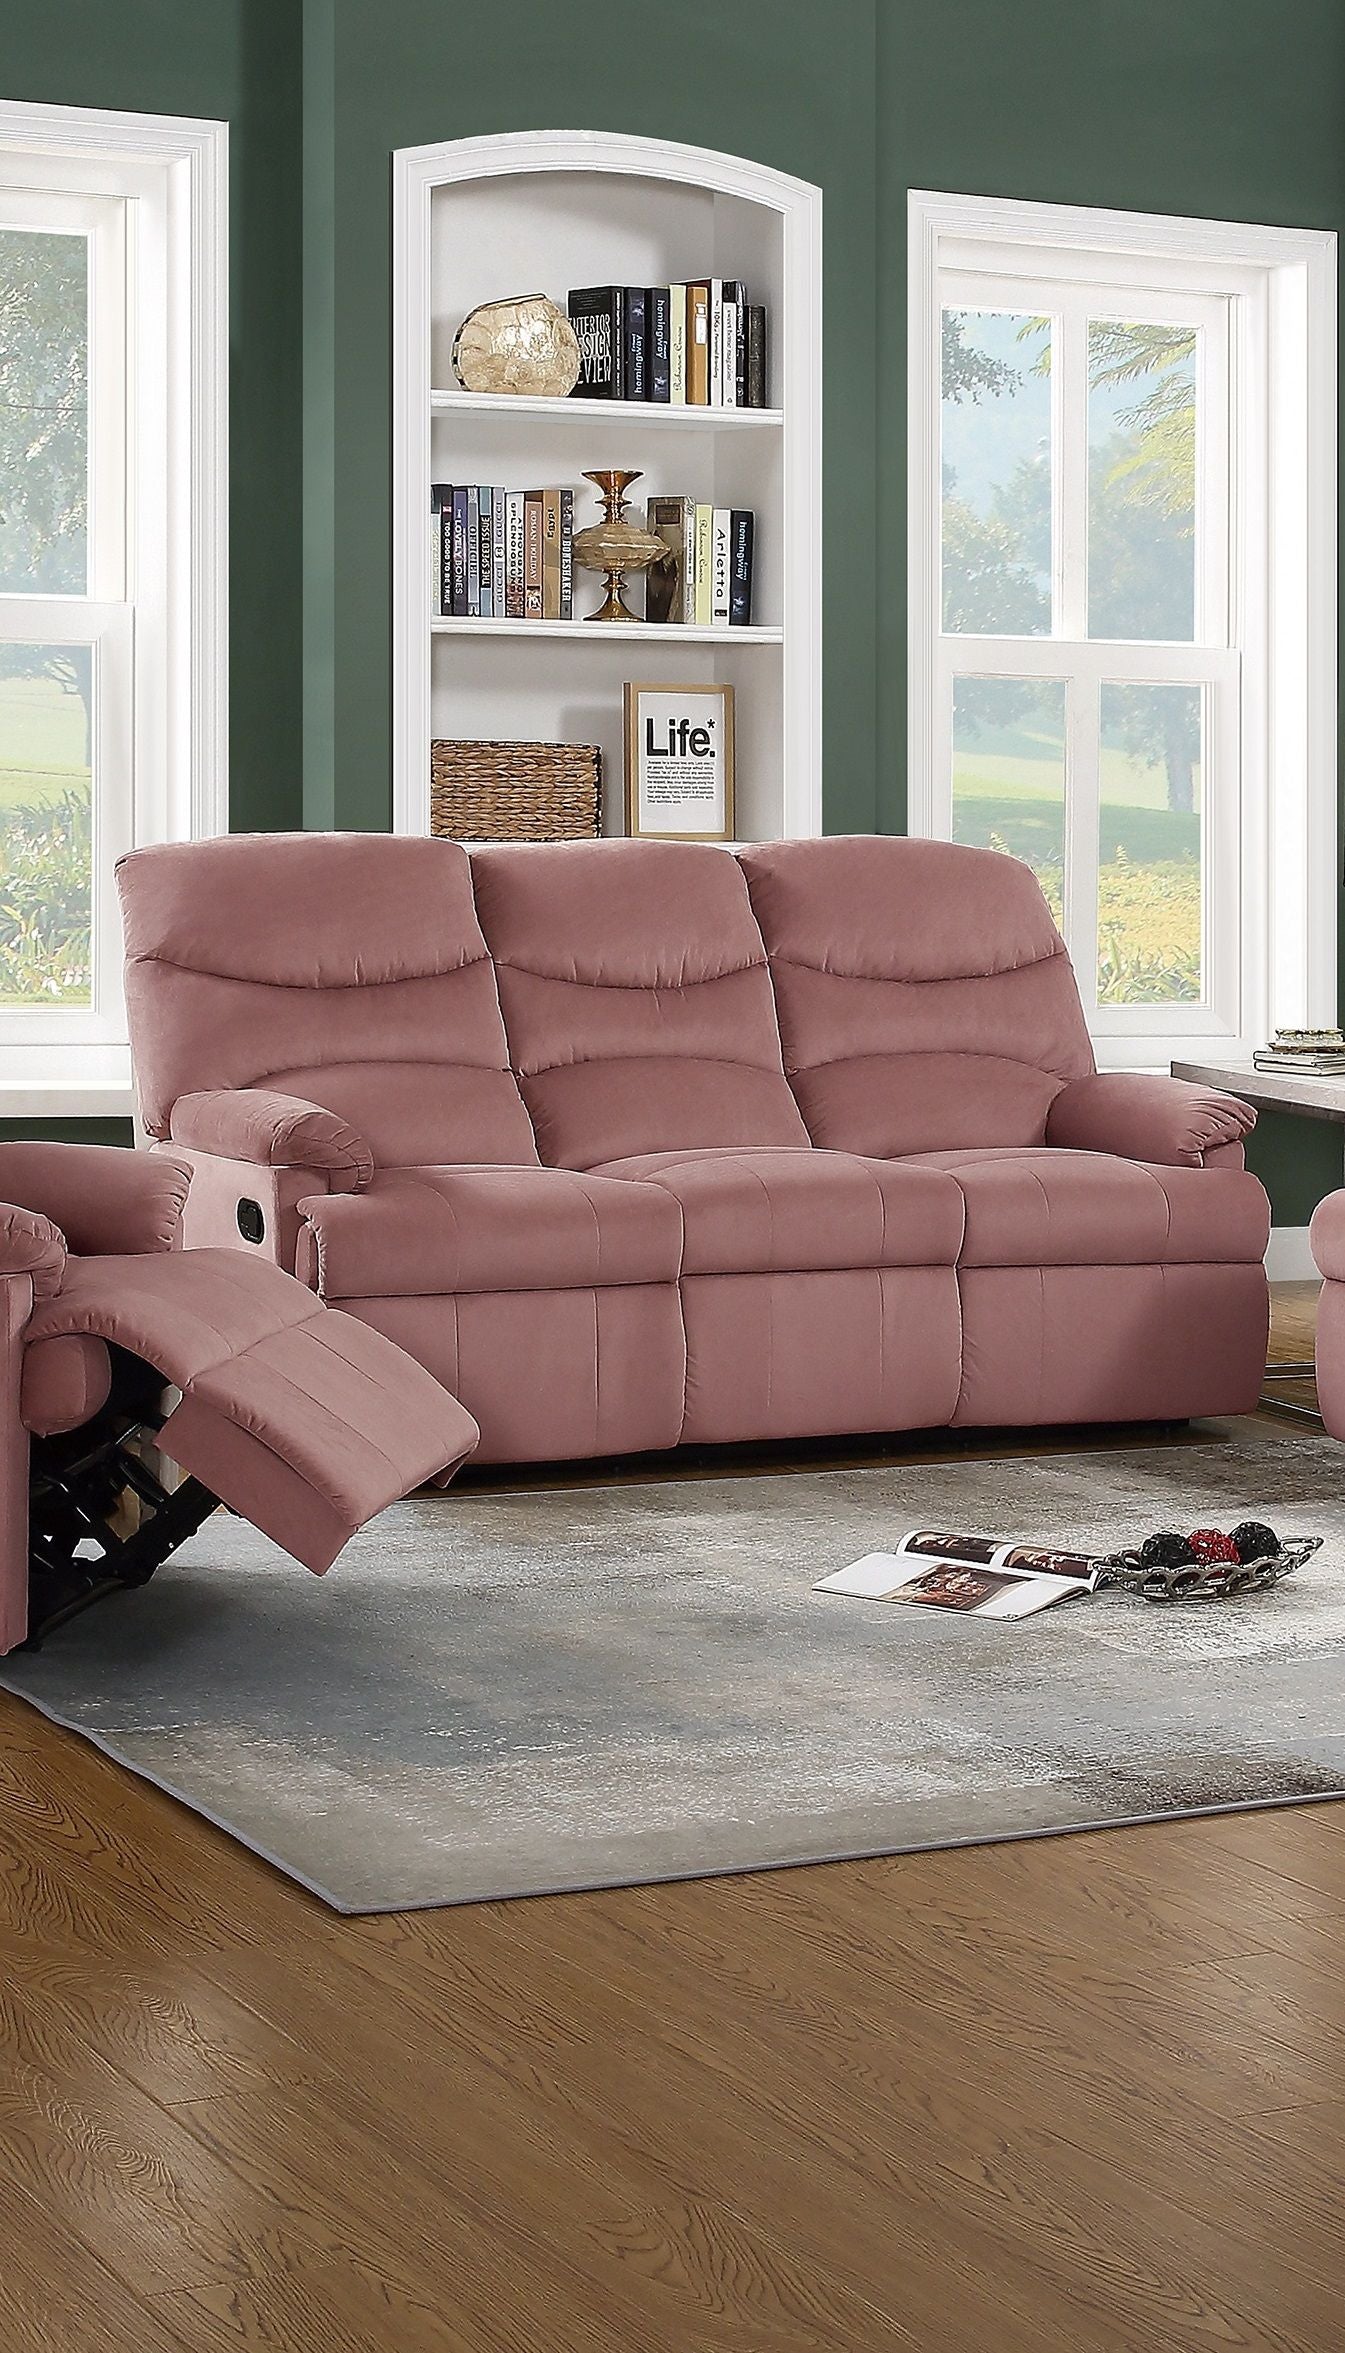 Luxurious Velvet Blush Pink Color 3 Seater Manual Recliner Sofa Couch Manual Motion Plush Armrest Living Room Furniture Sofa Couch